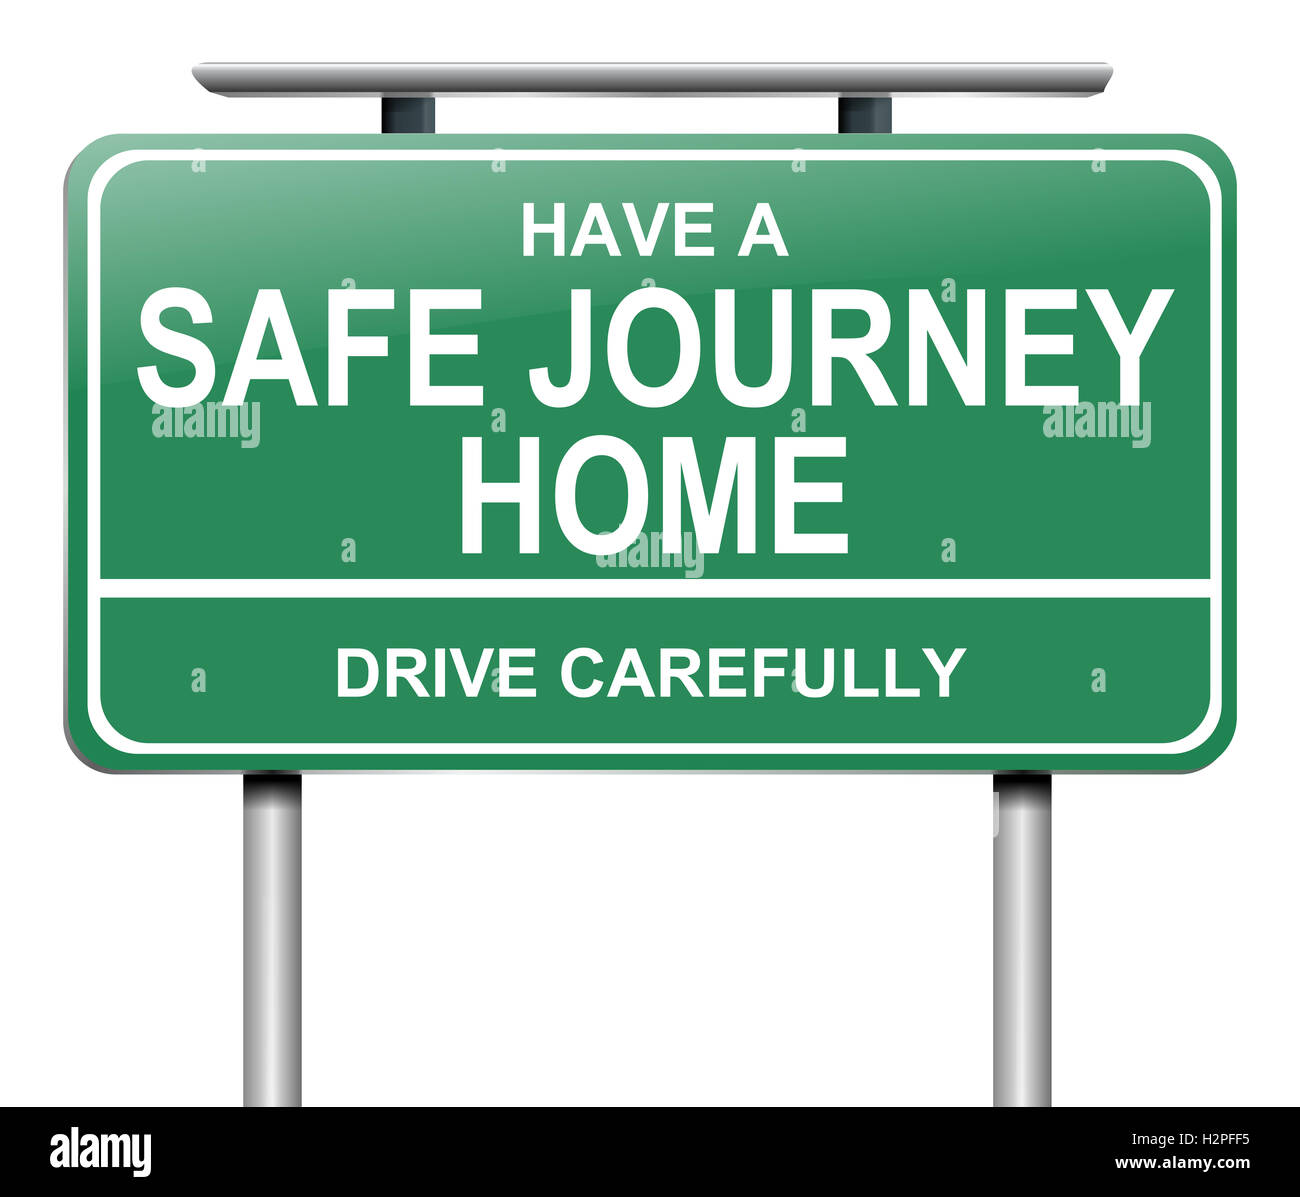 Drive Safe or Drive Safely: Which is it?